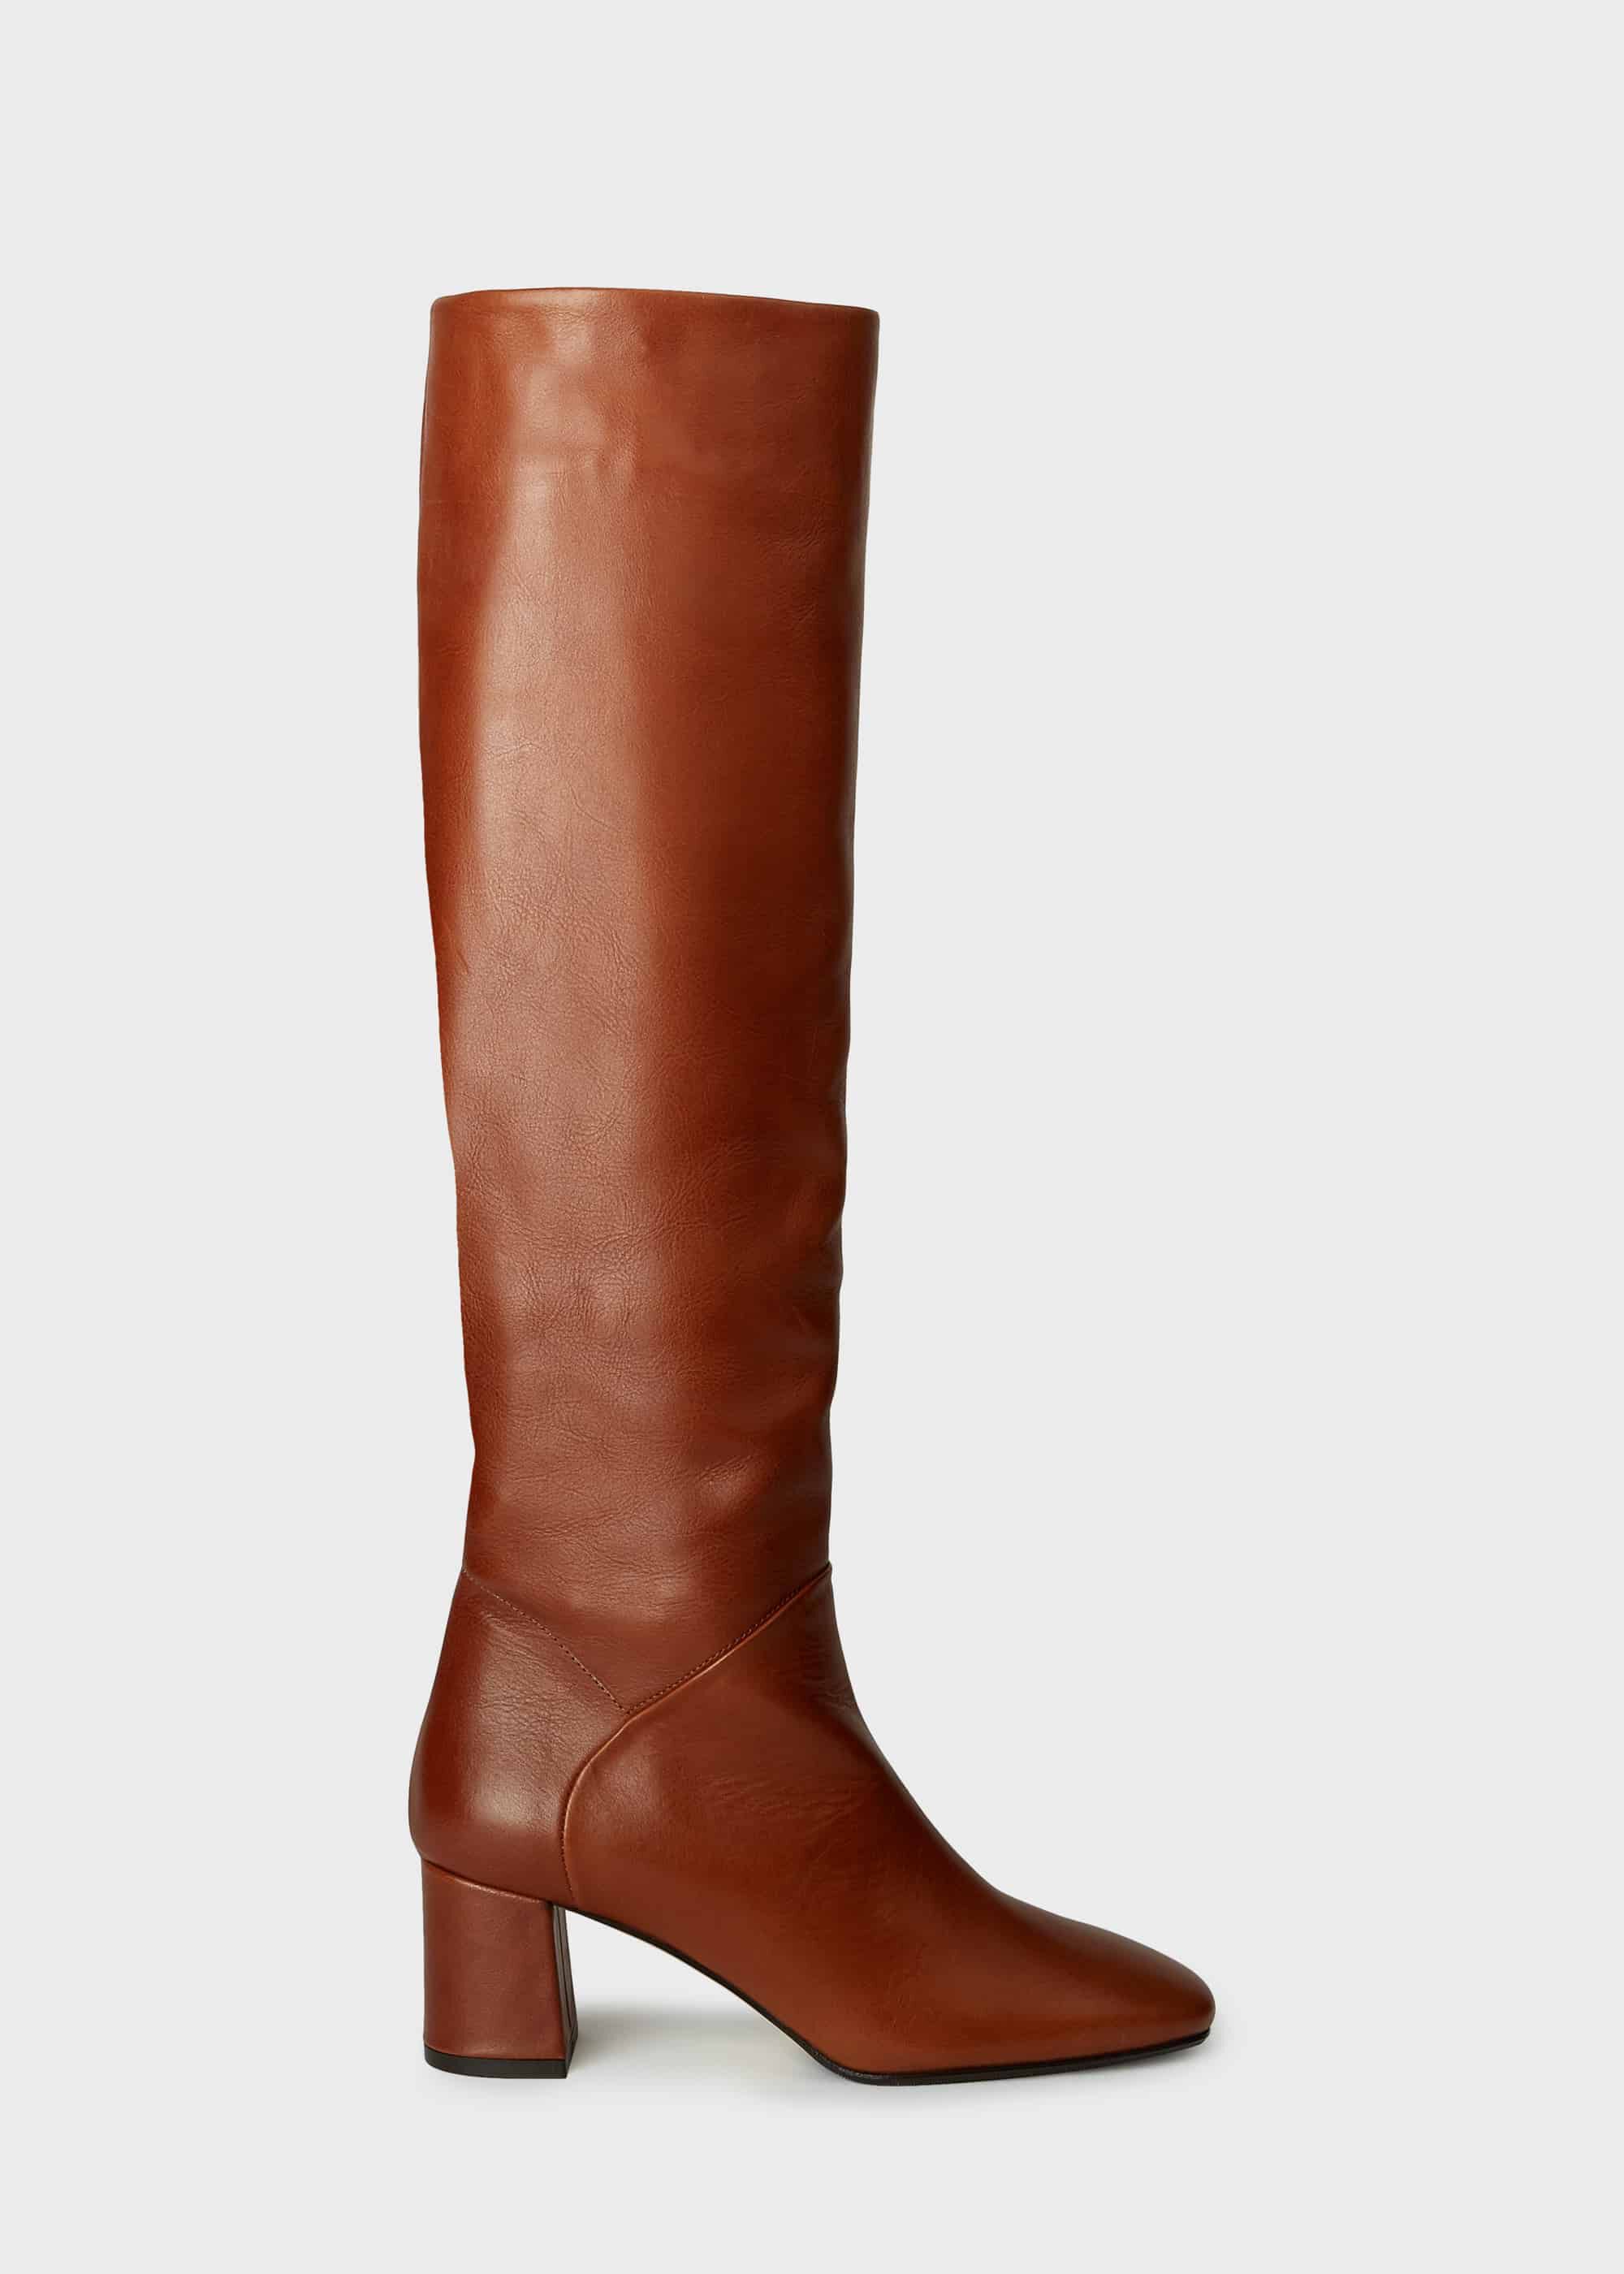 hobbs riding boots